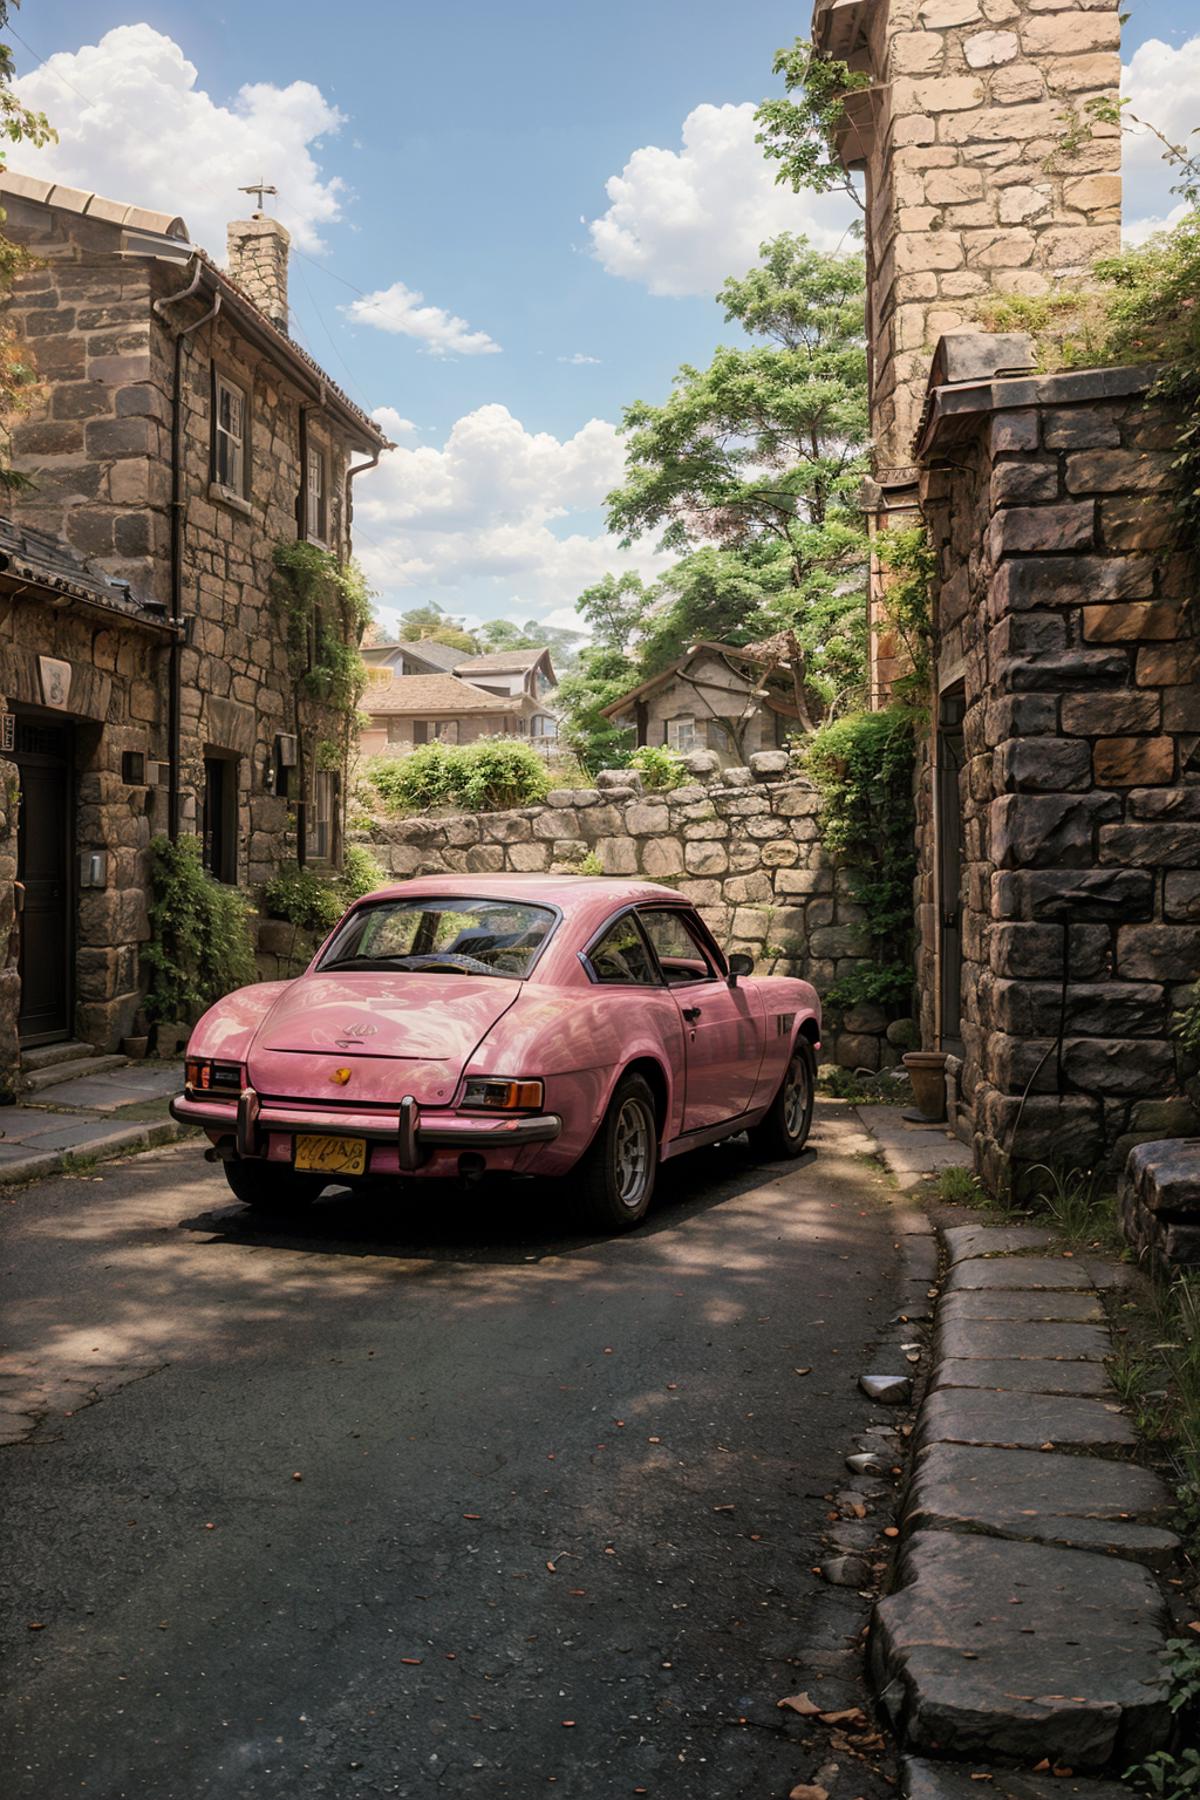 A pink sports car parked in an alleyway between stone buildings.